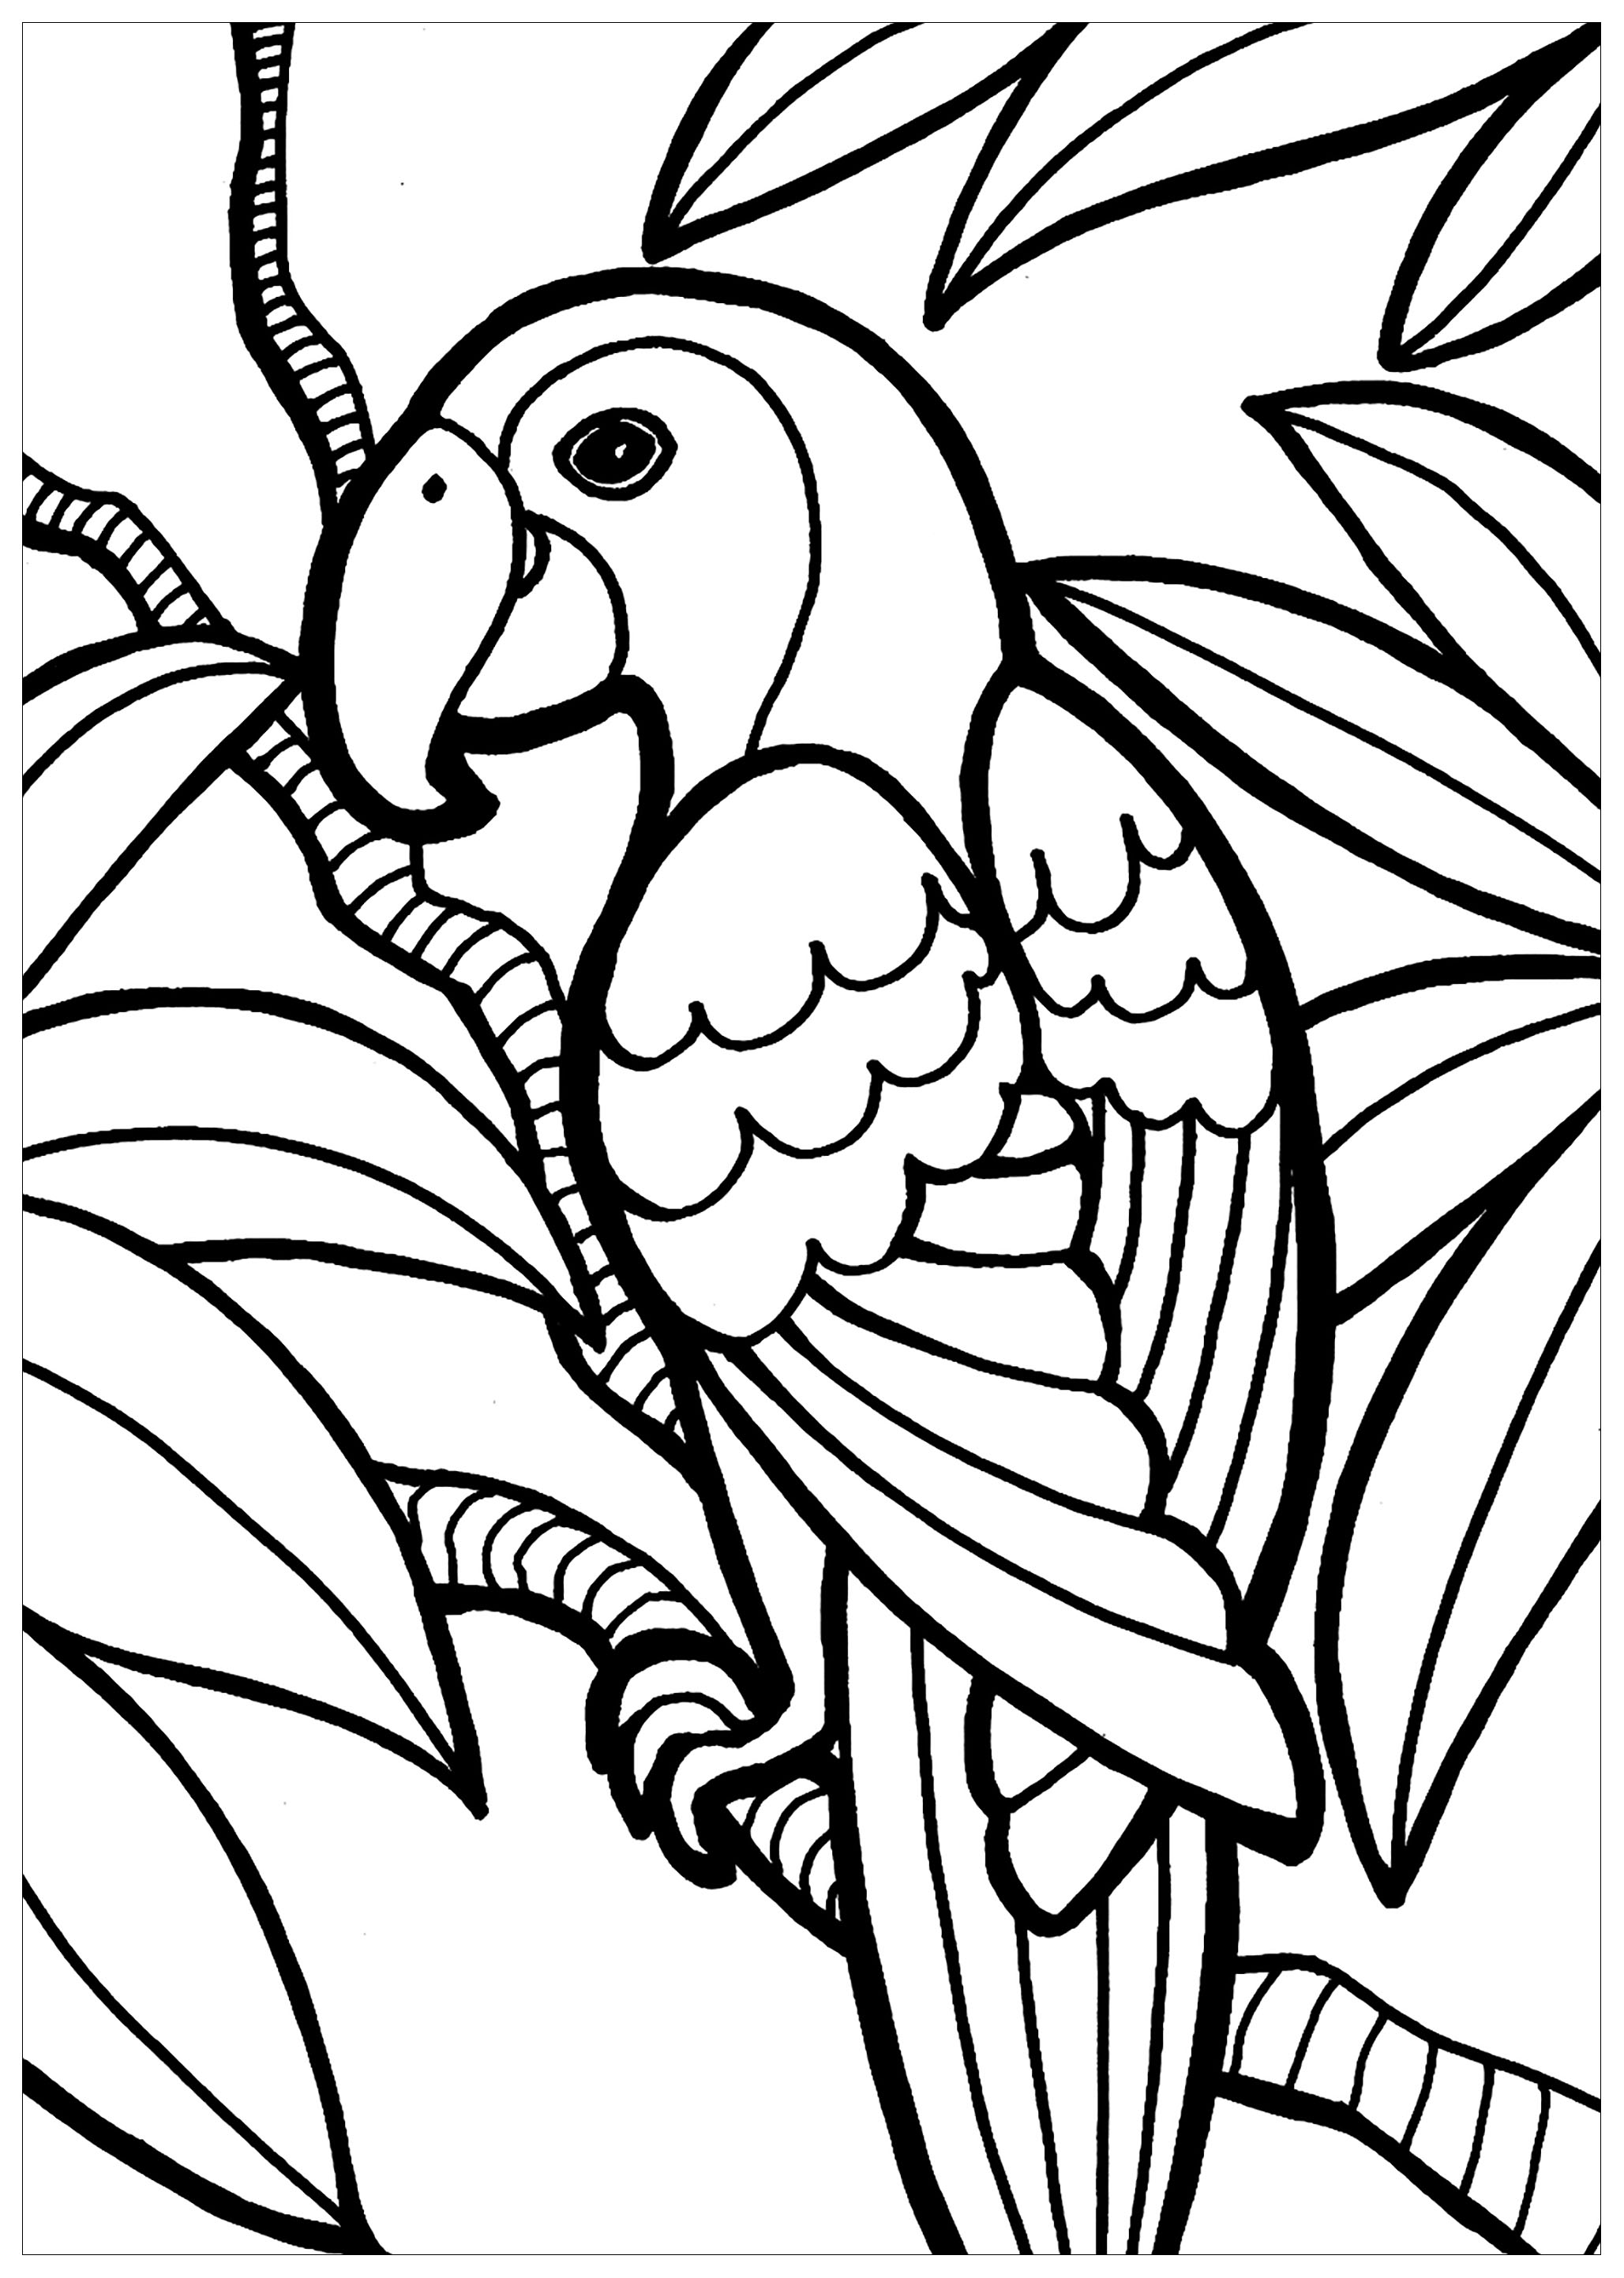 Birds-to-download - Birds Kids Coloring Pages